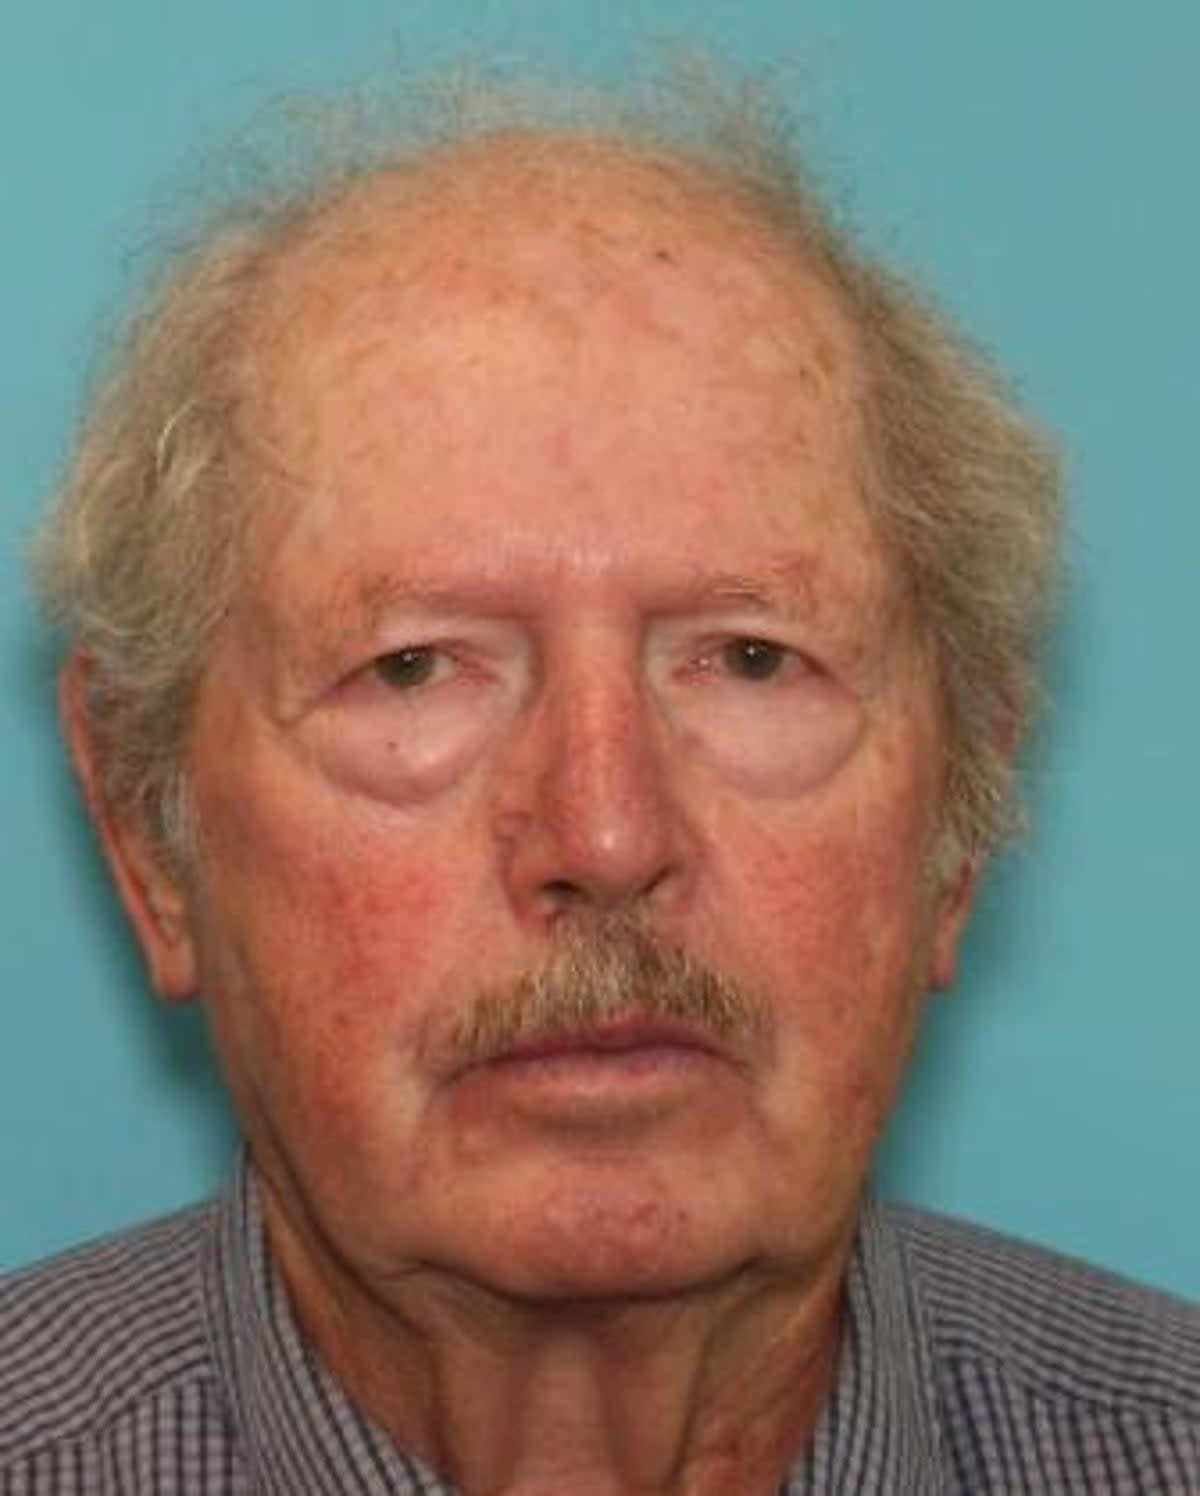 James L Mauney, 83, was identified as one of the murder victims in connection with the Idaho prison escape this week. (Nez Perce County Sheriff’s Office)